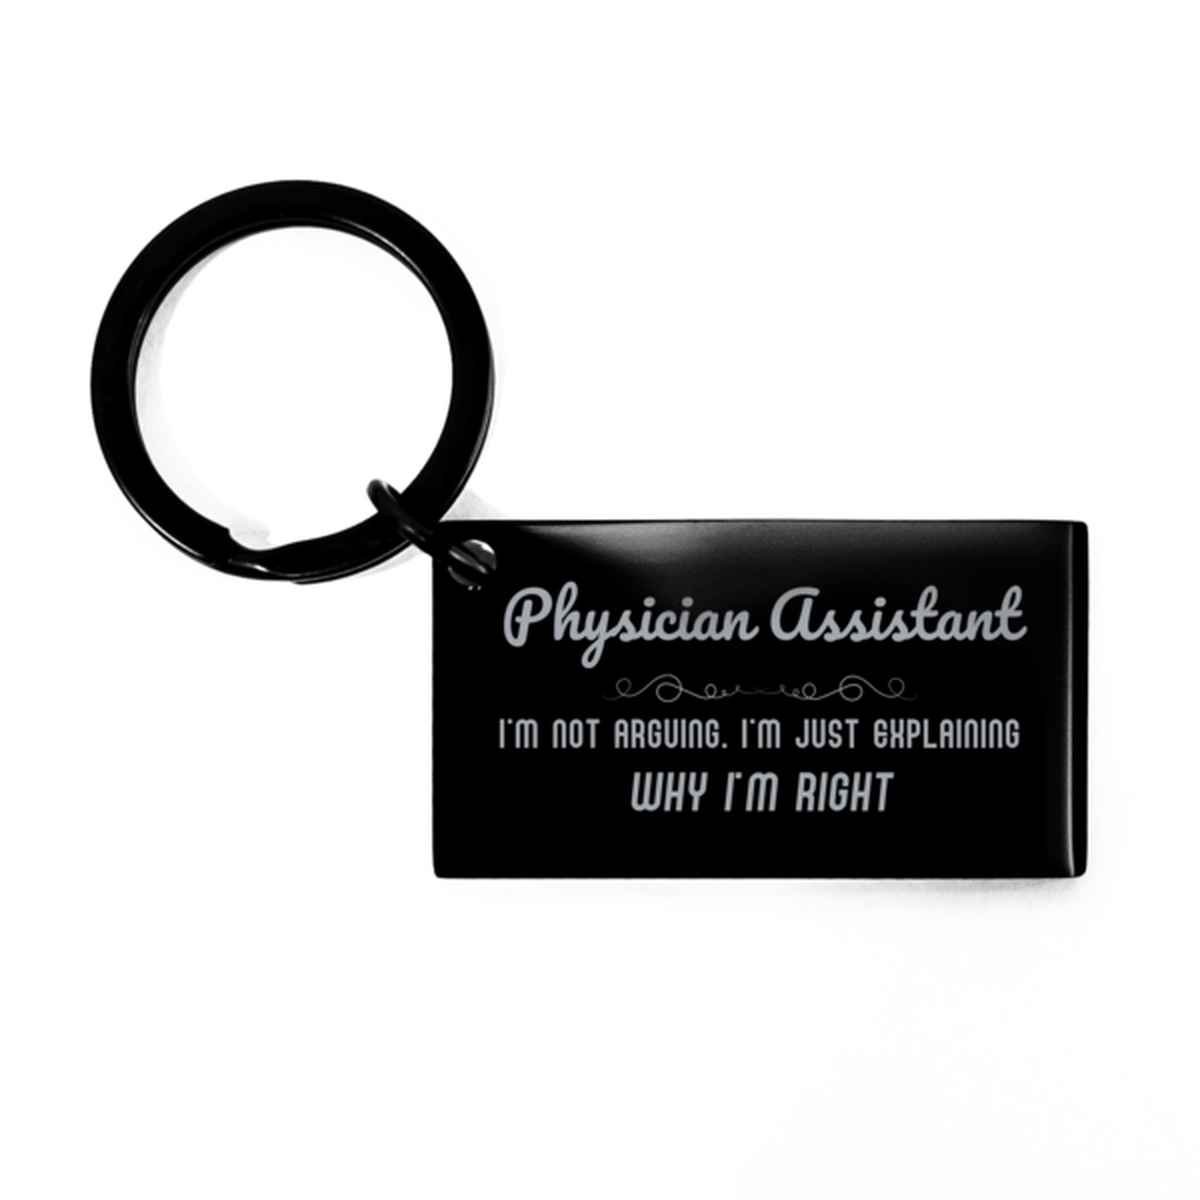 Physician Assistant I'm not Arguing. I'm Just Explaining Why I'm RIGHT Keychain, Funny Saying Quote Physician Assistant Gifts For Physician Assistant Graduation Birthday Christmas Gifts for Men Women Coworker